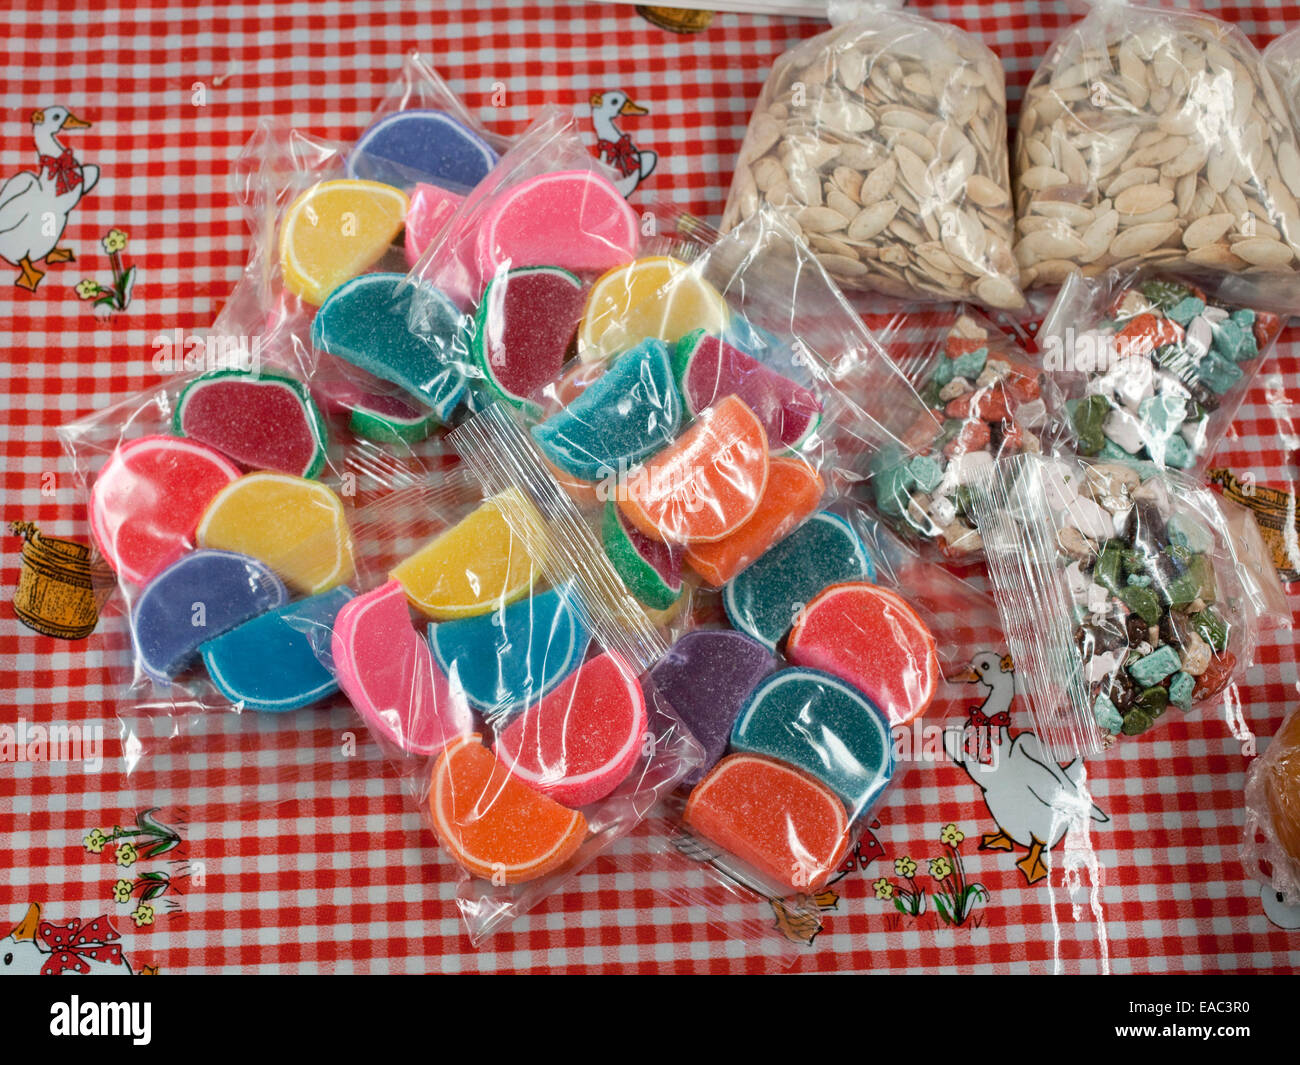 Colorful Candy at Mexican Market Stock Photo